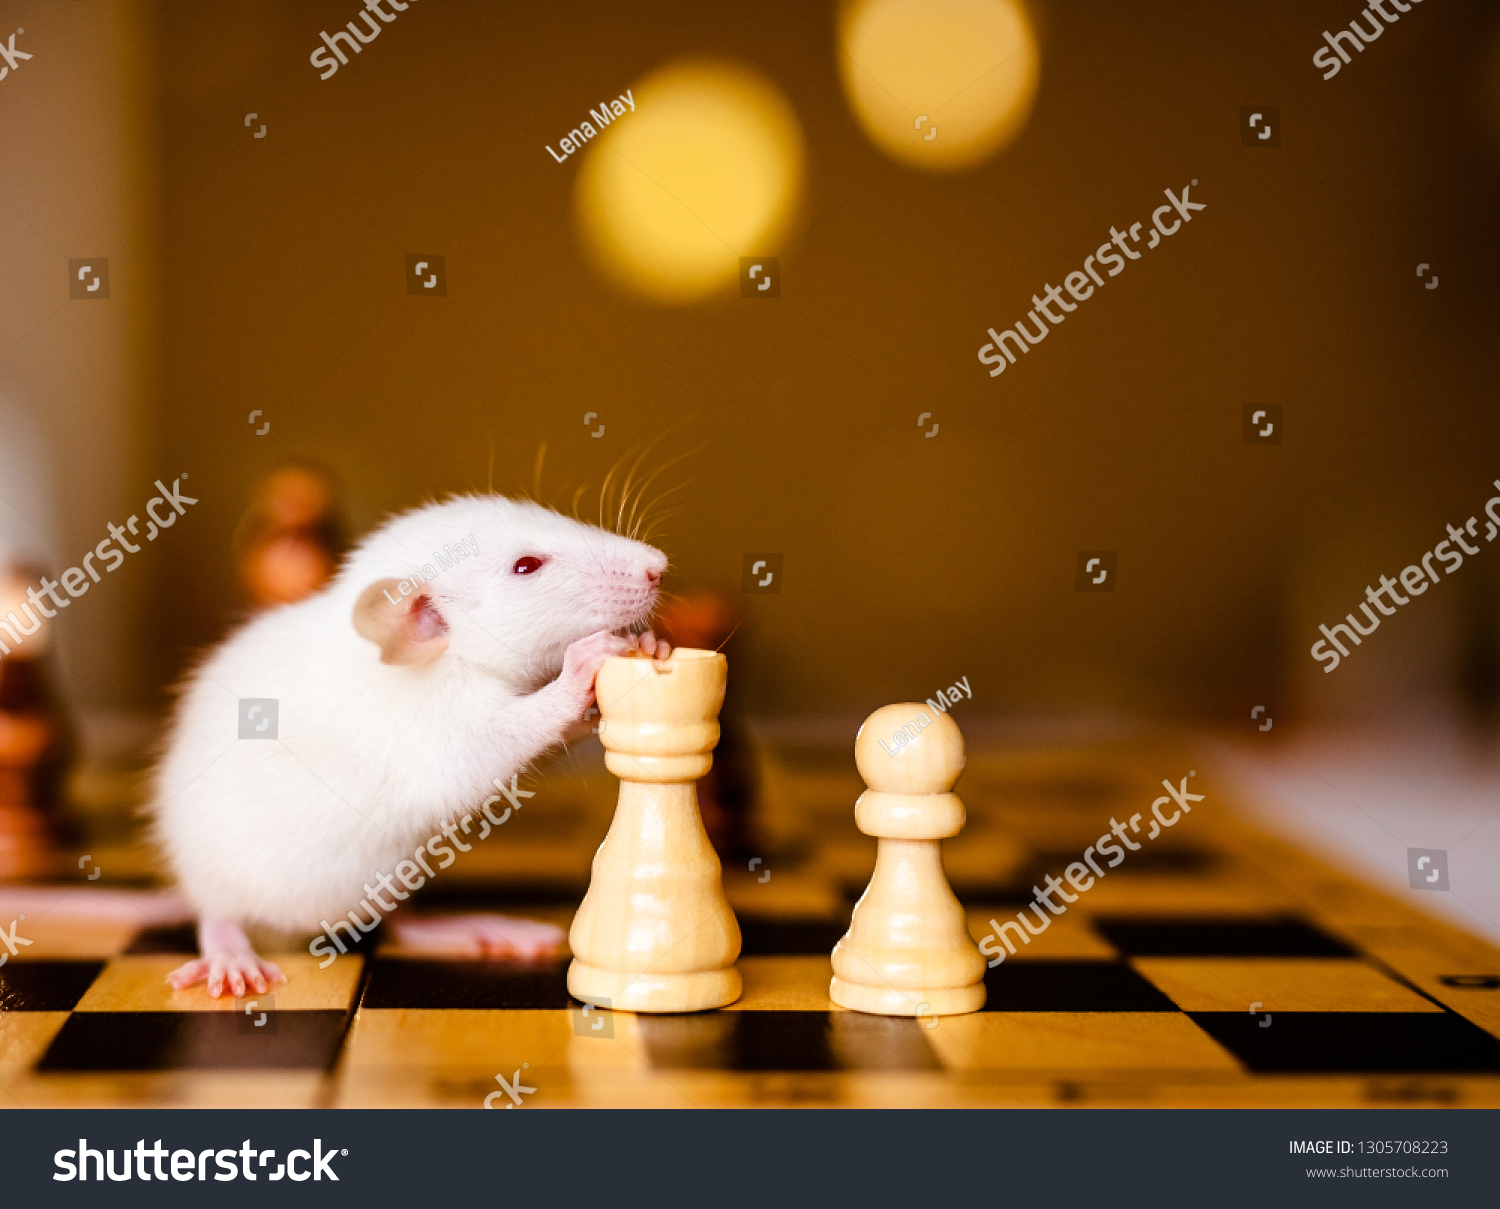 Cute little white rat with big ears siting on the chess board on the warm yellow background. #1305708223